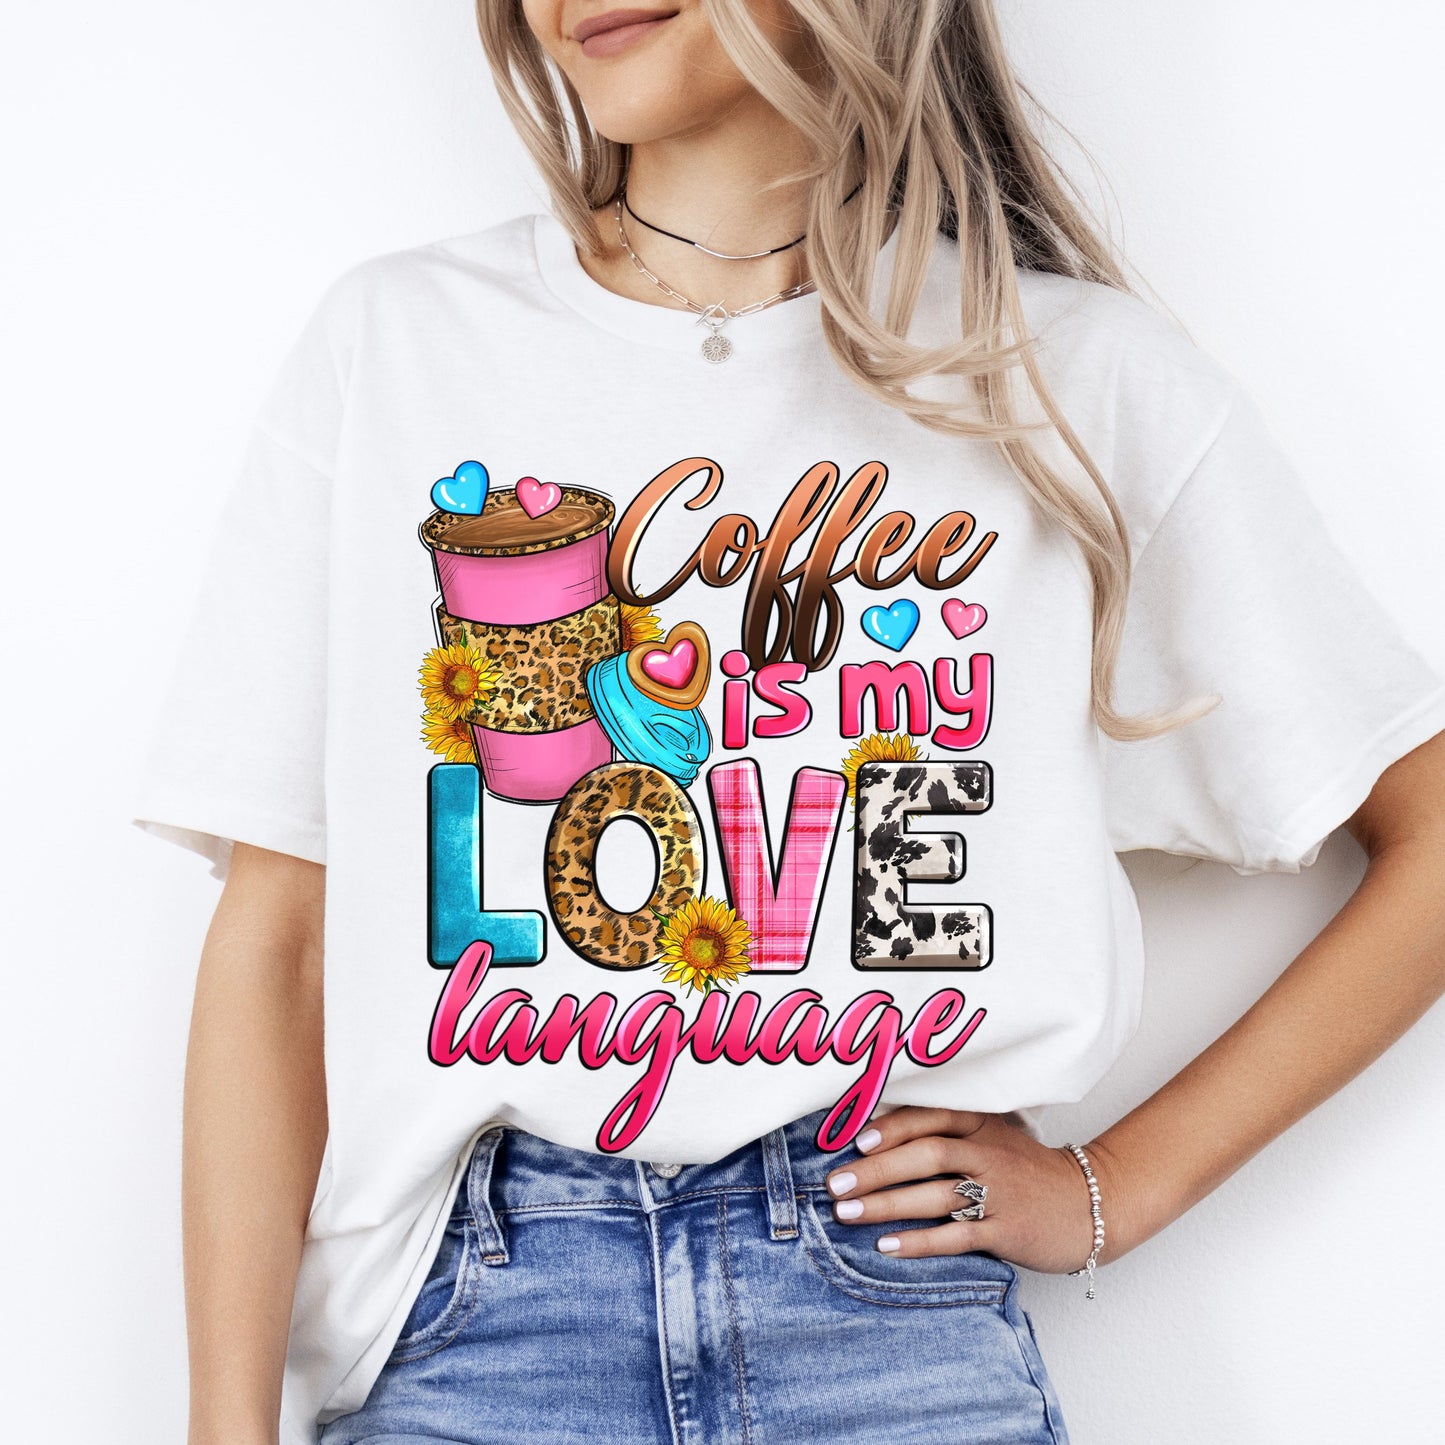 Coffee is my love language T-Shirt Barista coffee lover Unisex tee White Sand Sport Grey-White-Family-Gift-Planet